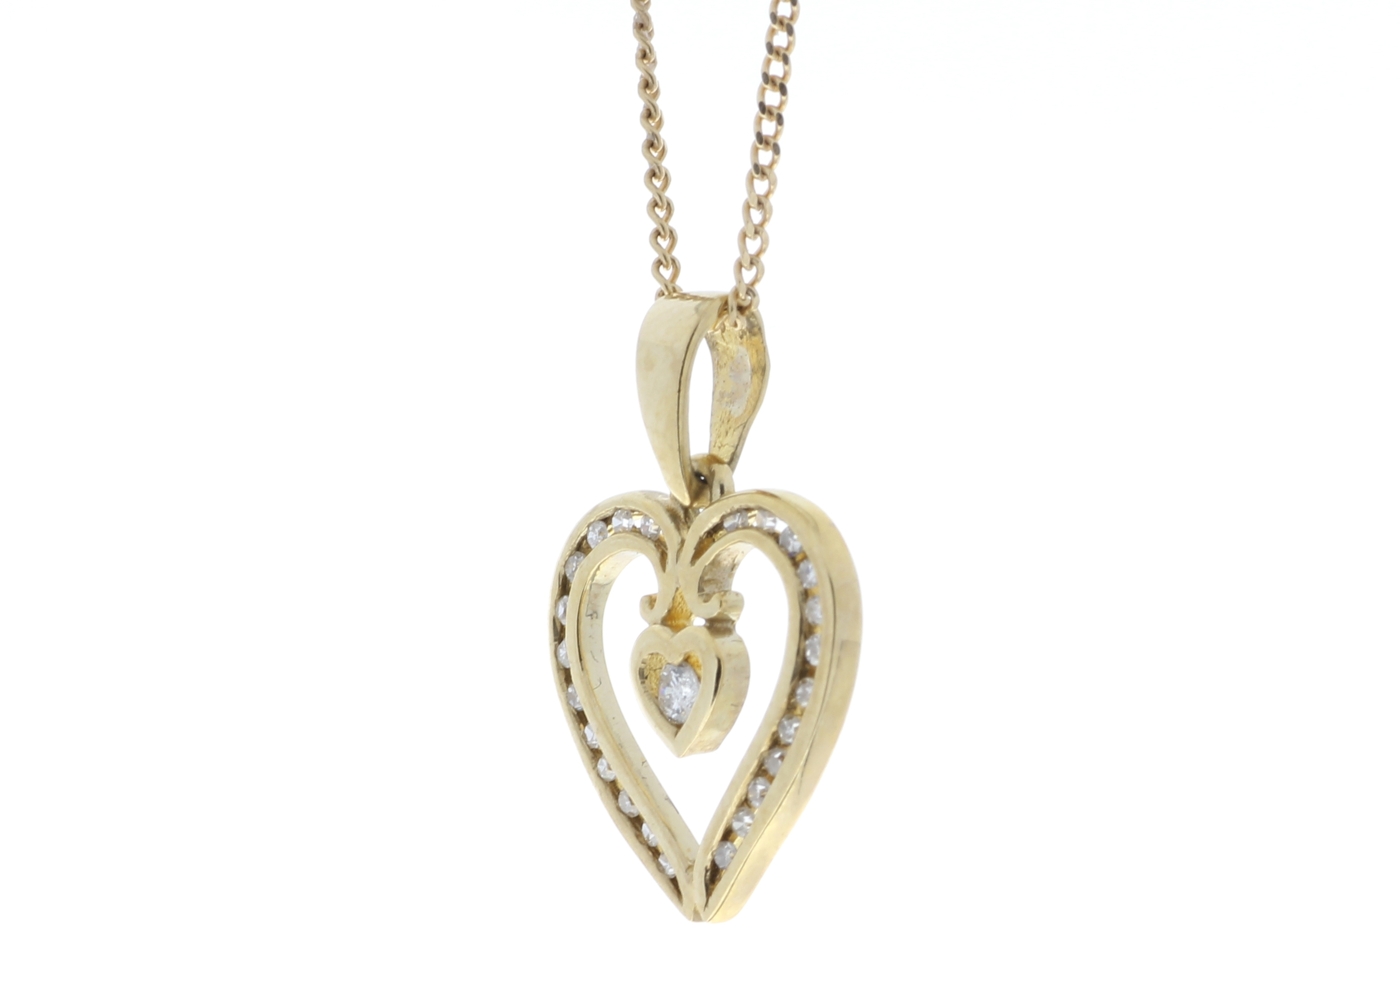 9ct Yellow Gold Heart Shaped Pendant Set With Diamonds 0.16 Carats - Image 4 of 5